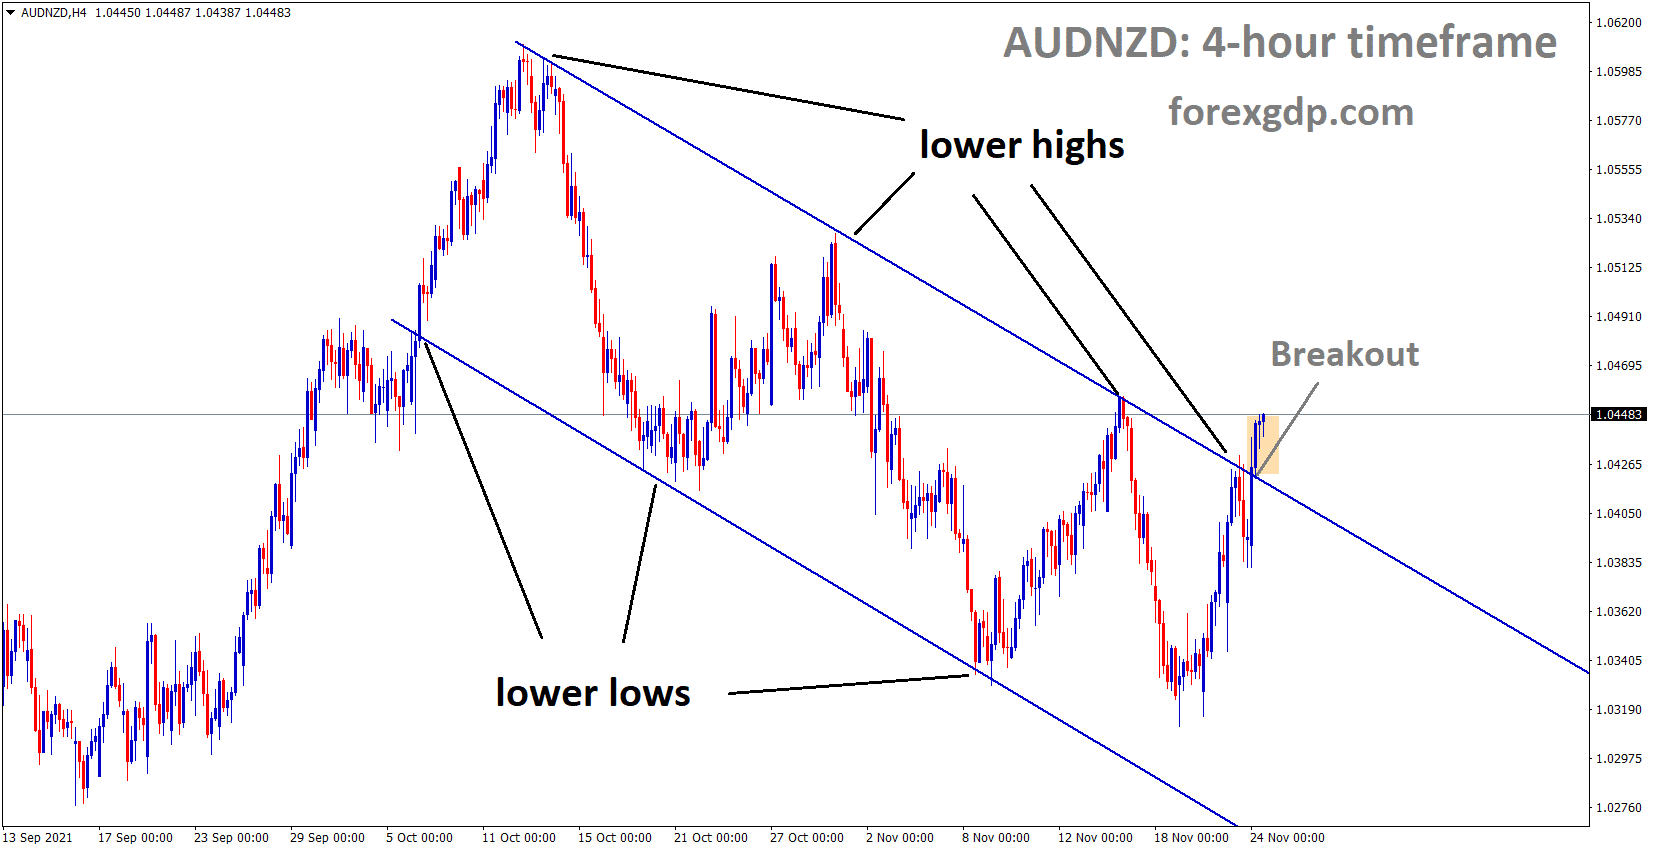 AUDNZD has broken the Descending channel and market price near to the previous high of the channel 1